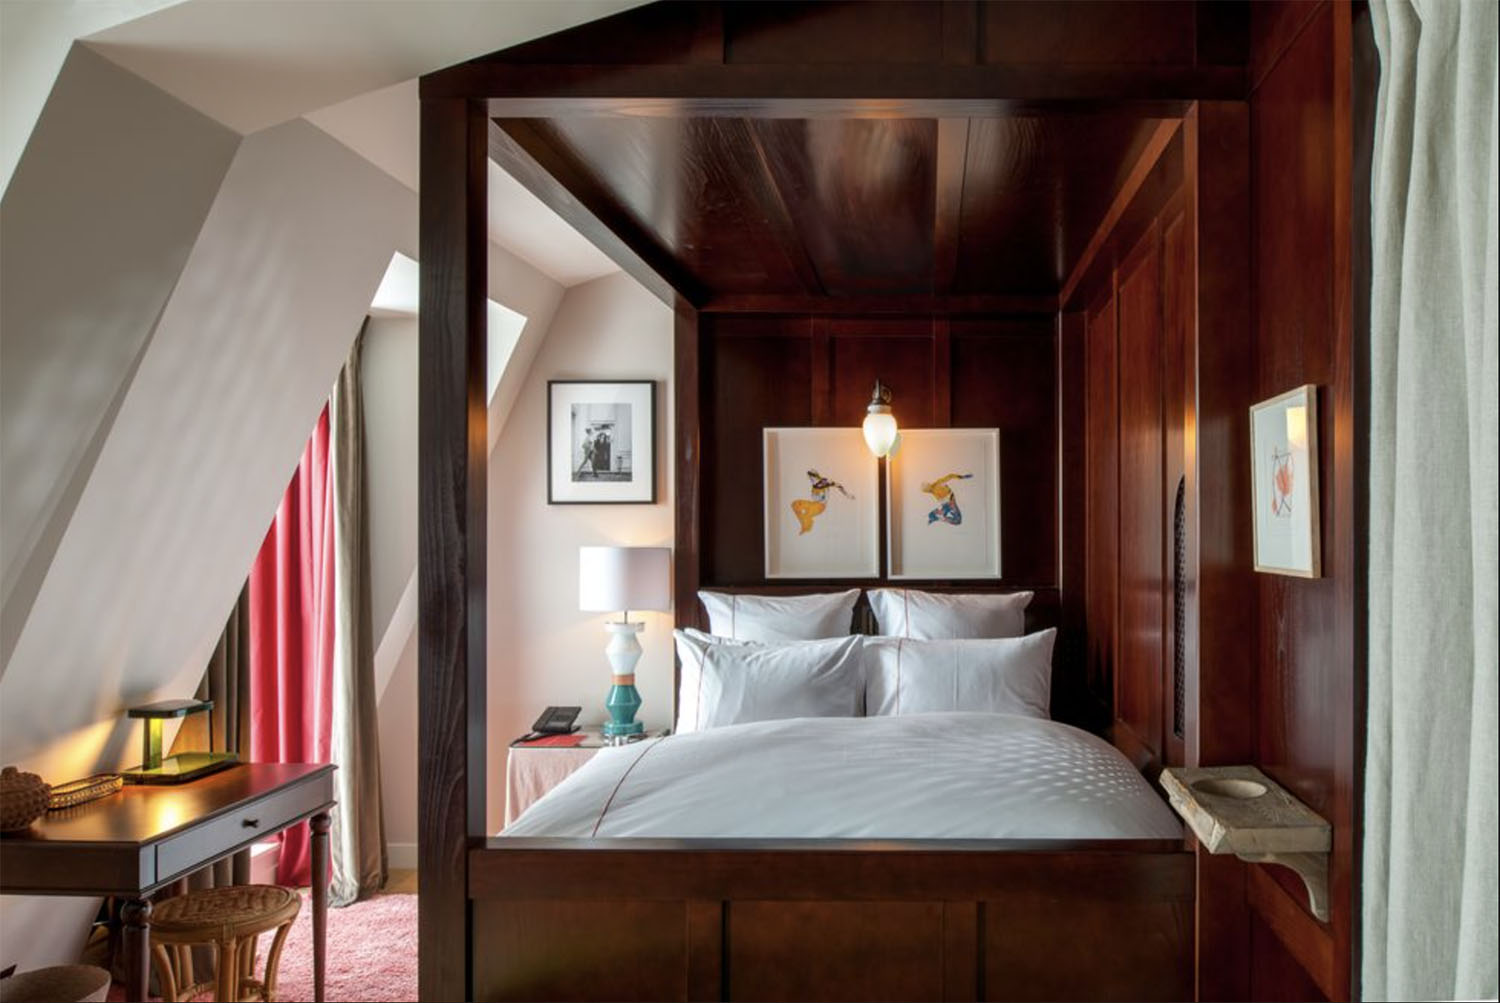 A wooden canopy bed surrounded by contemporary artwork and vaulted walls